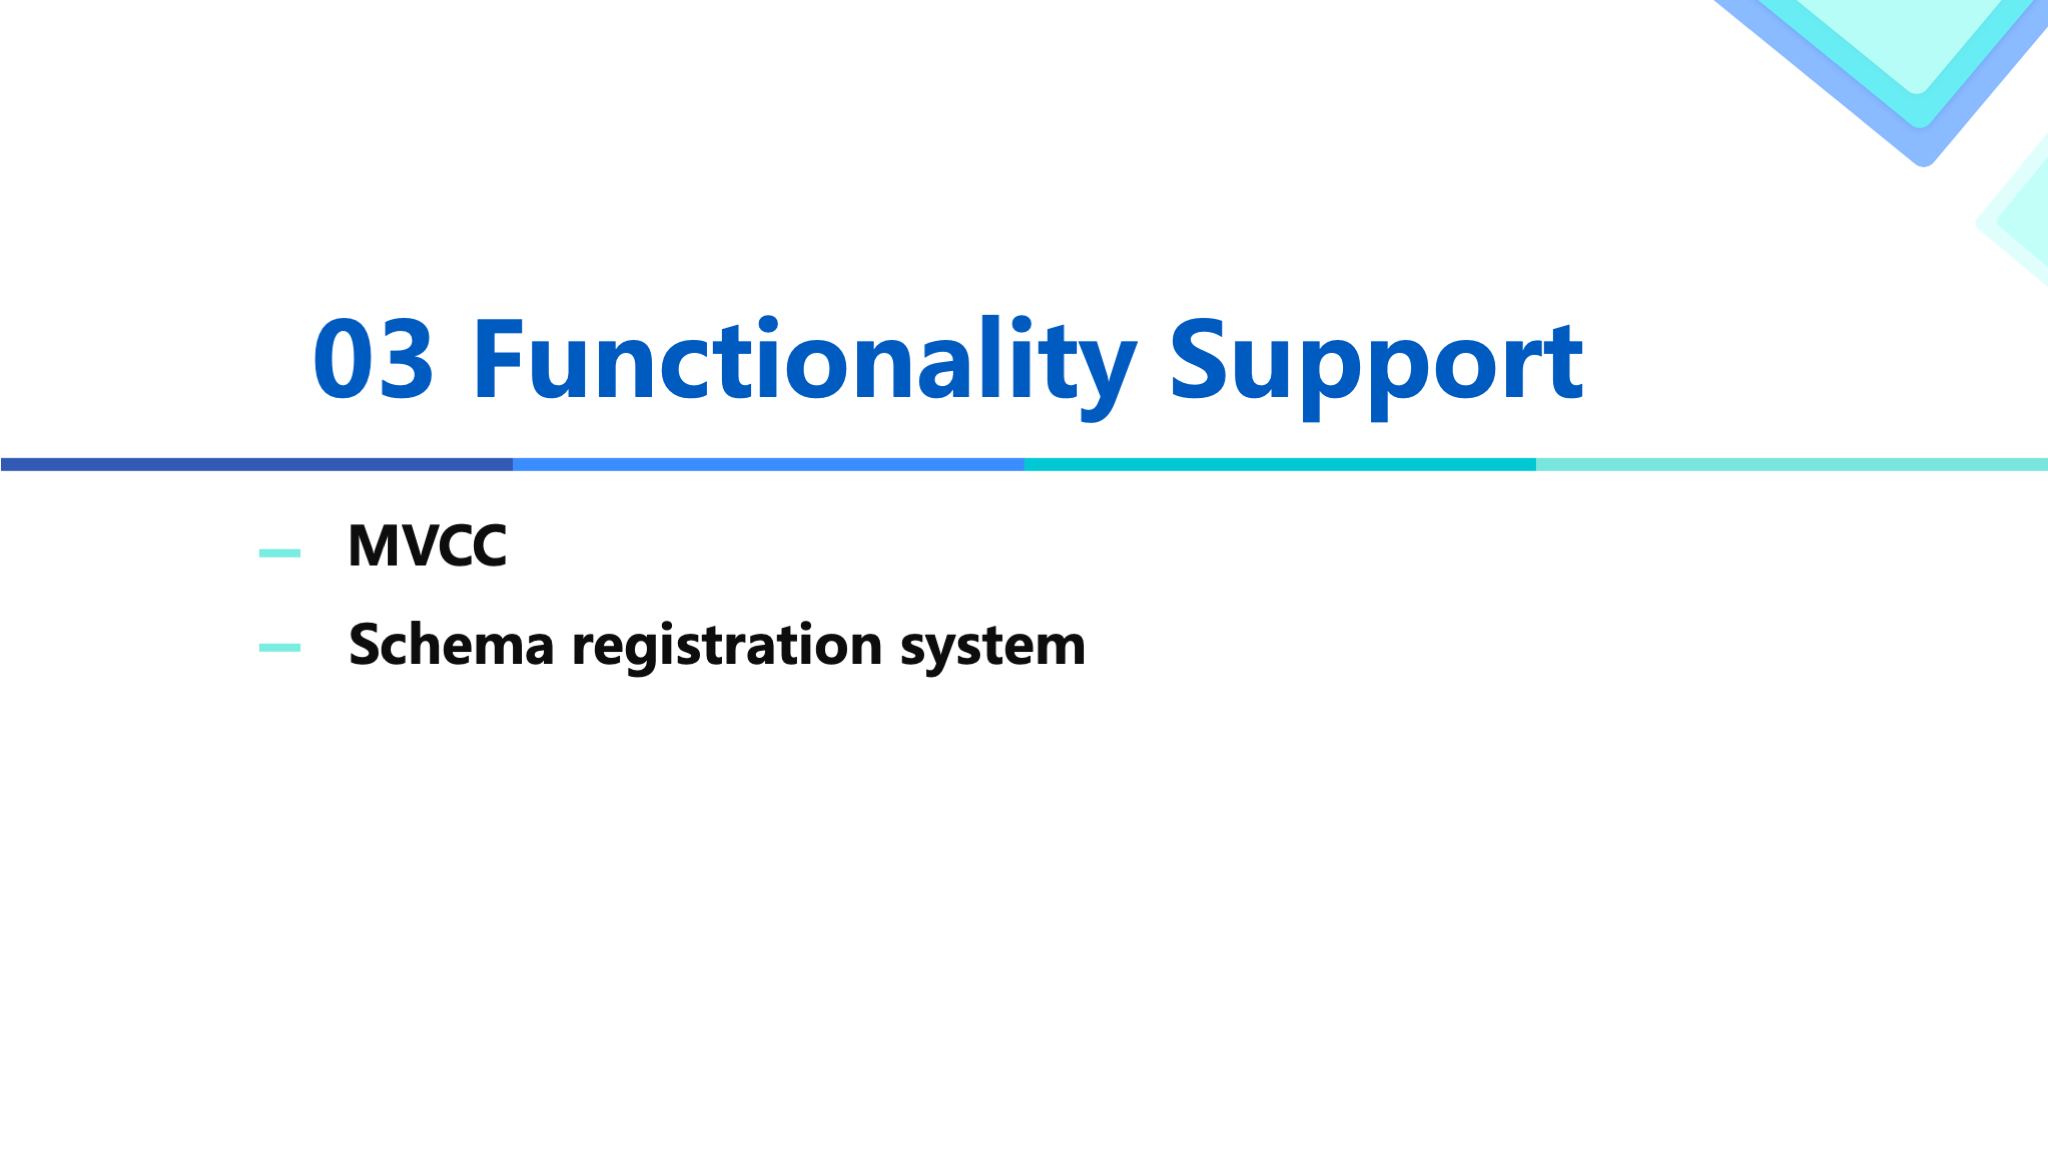 slide8 functionality support